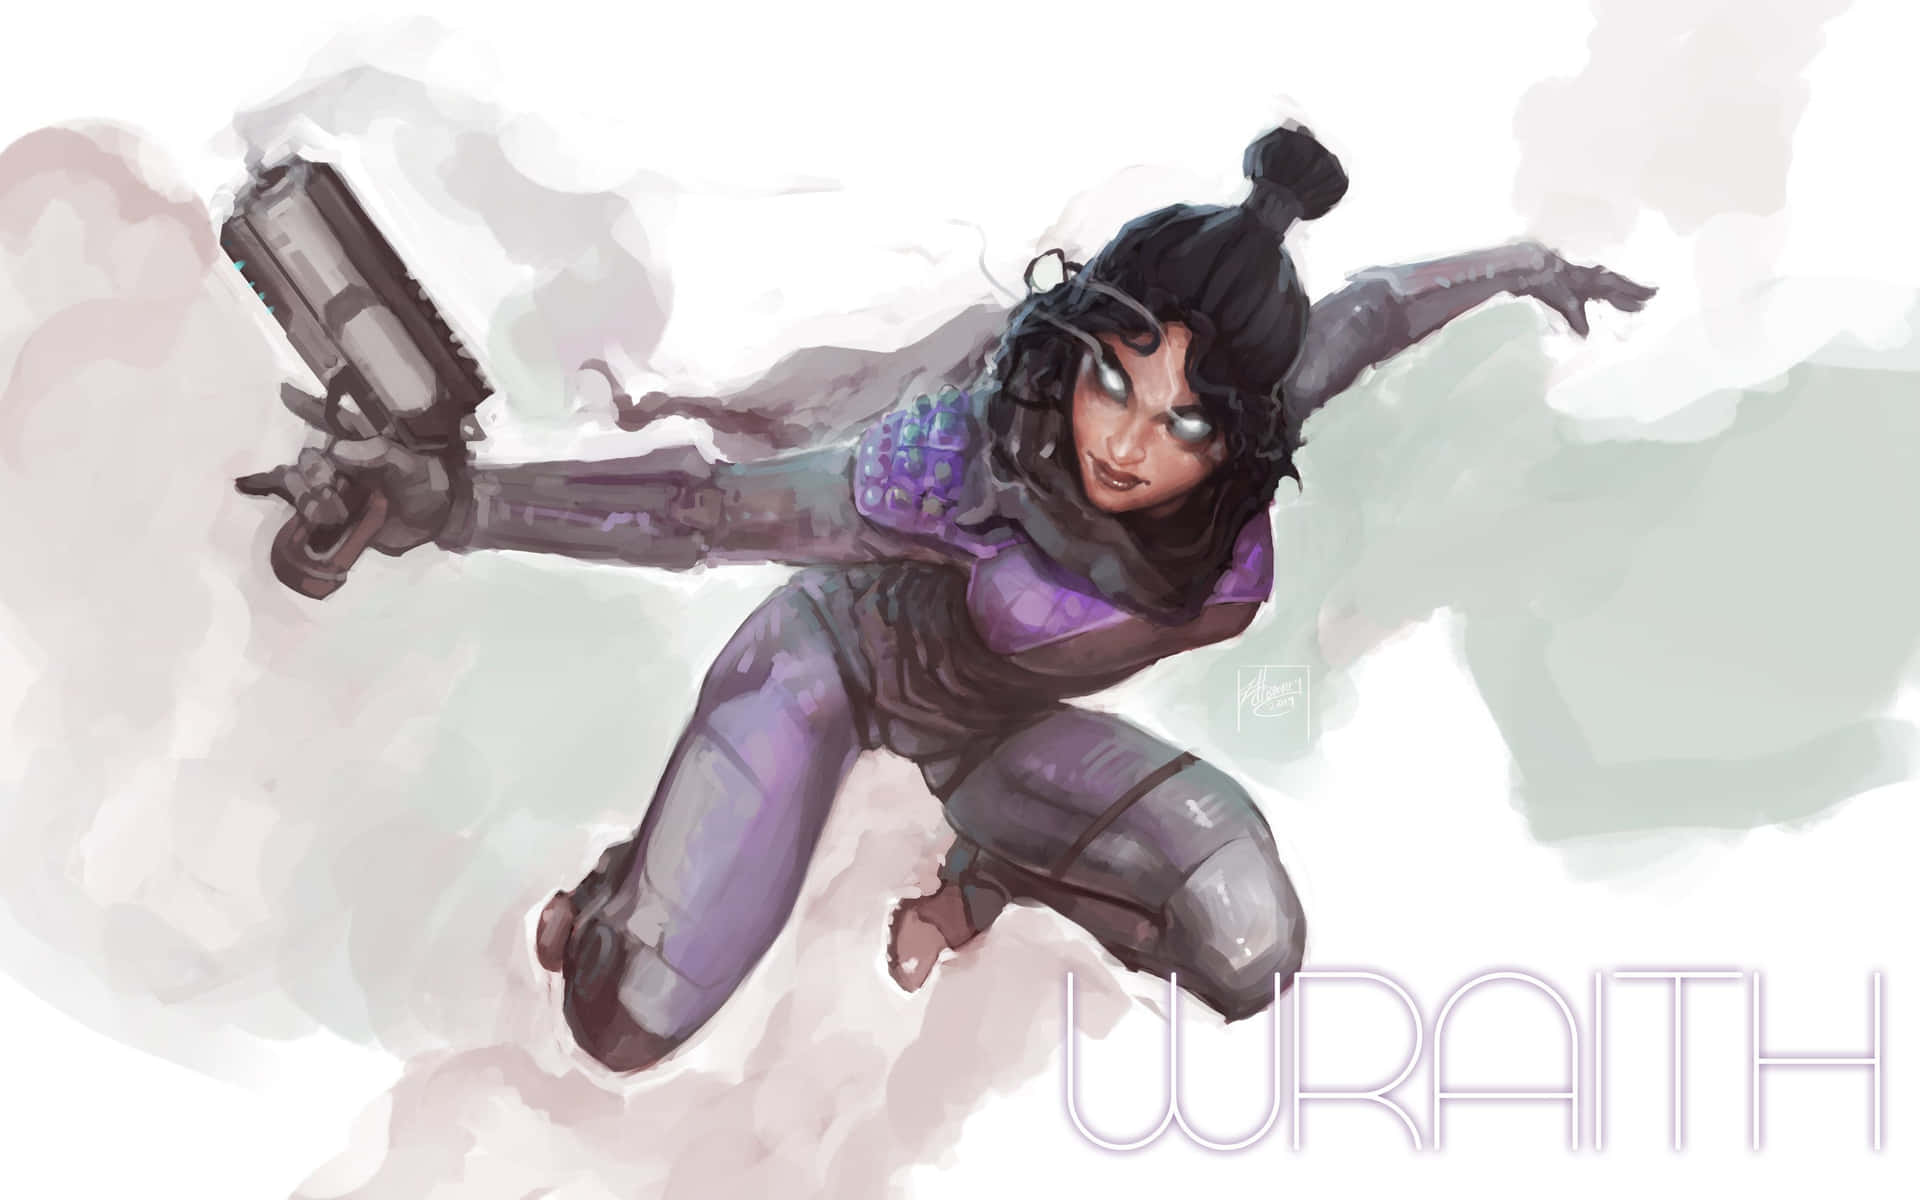 Apex Legends - Wraith In Action Wallpaper